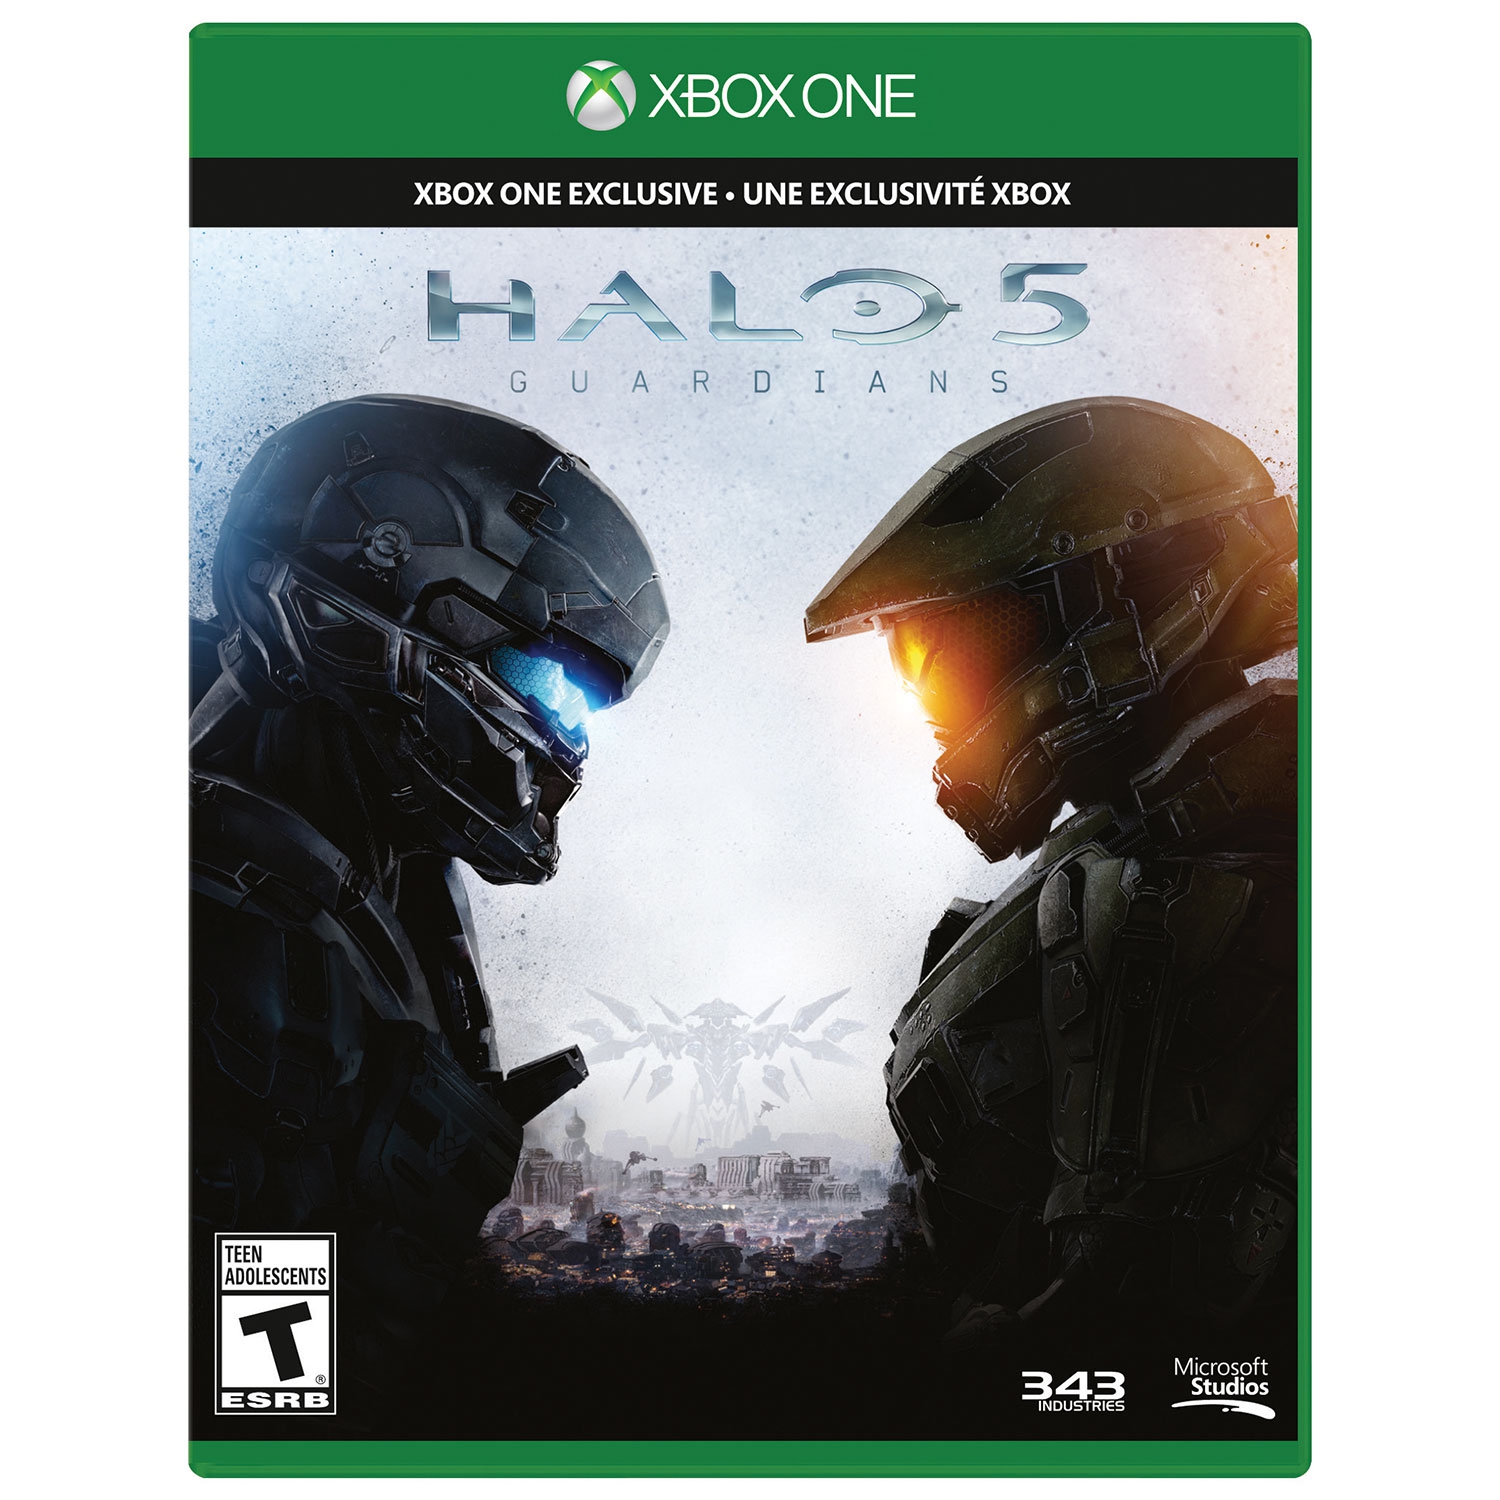 Halo 5: Guardians I Xbox One Video Game I Previously Played